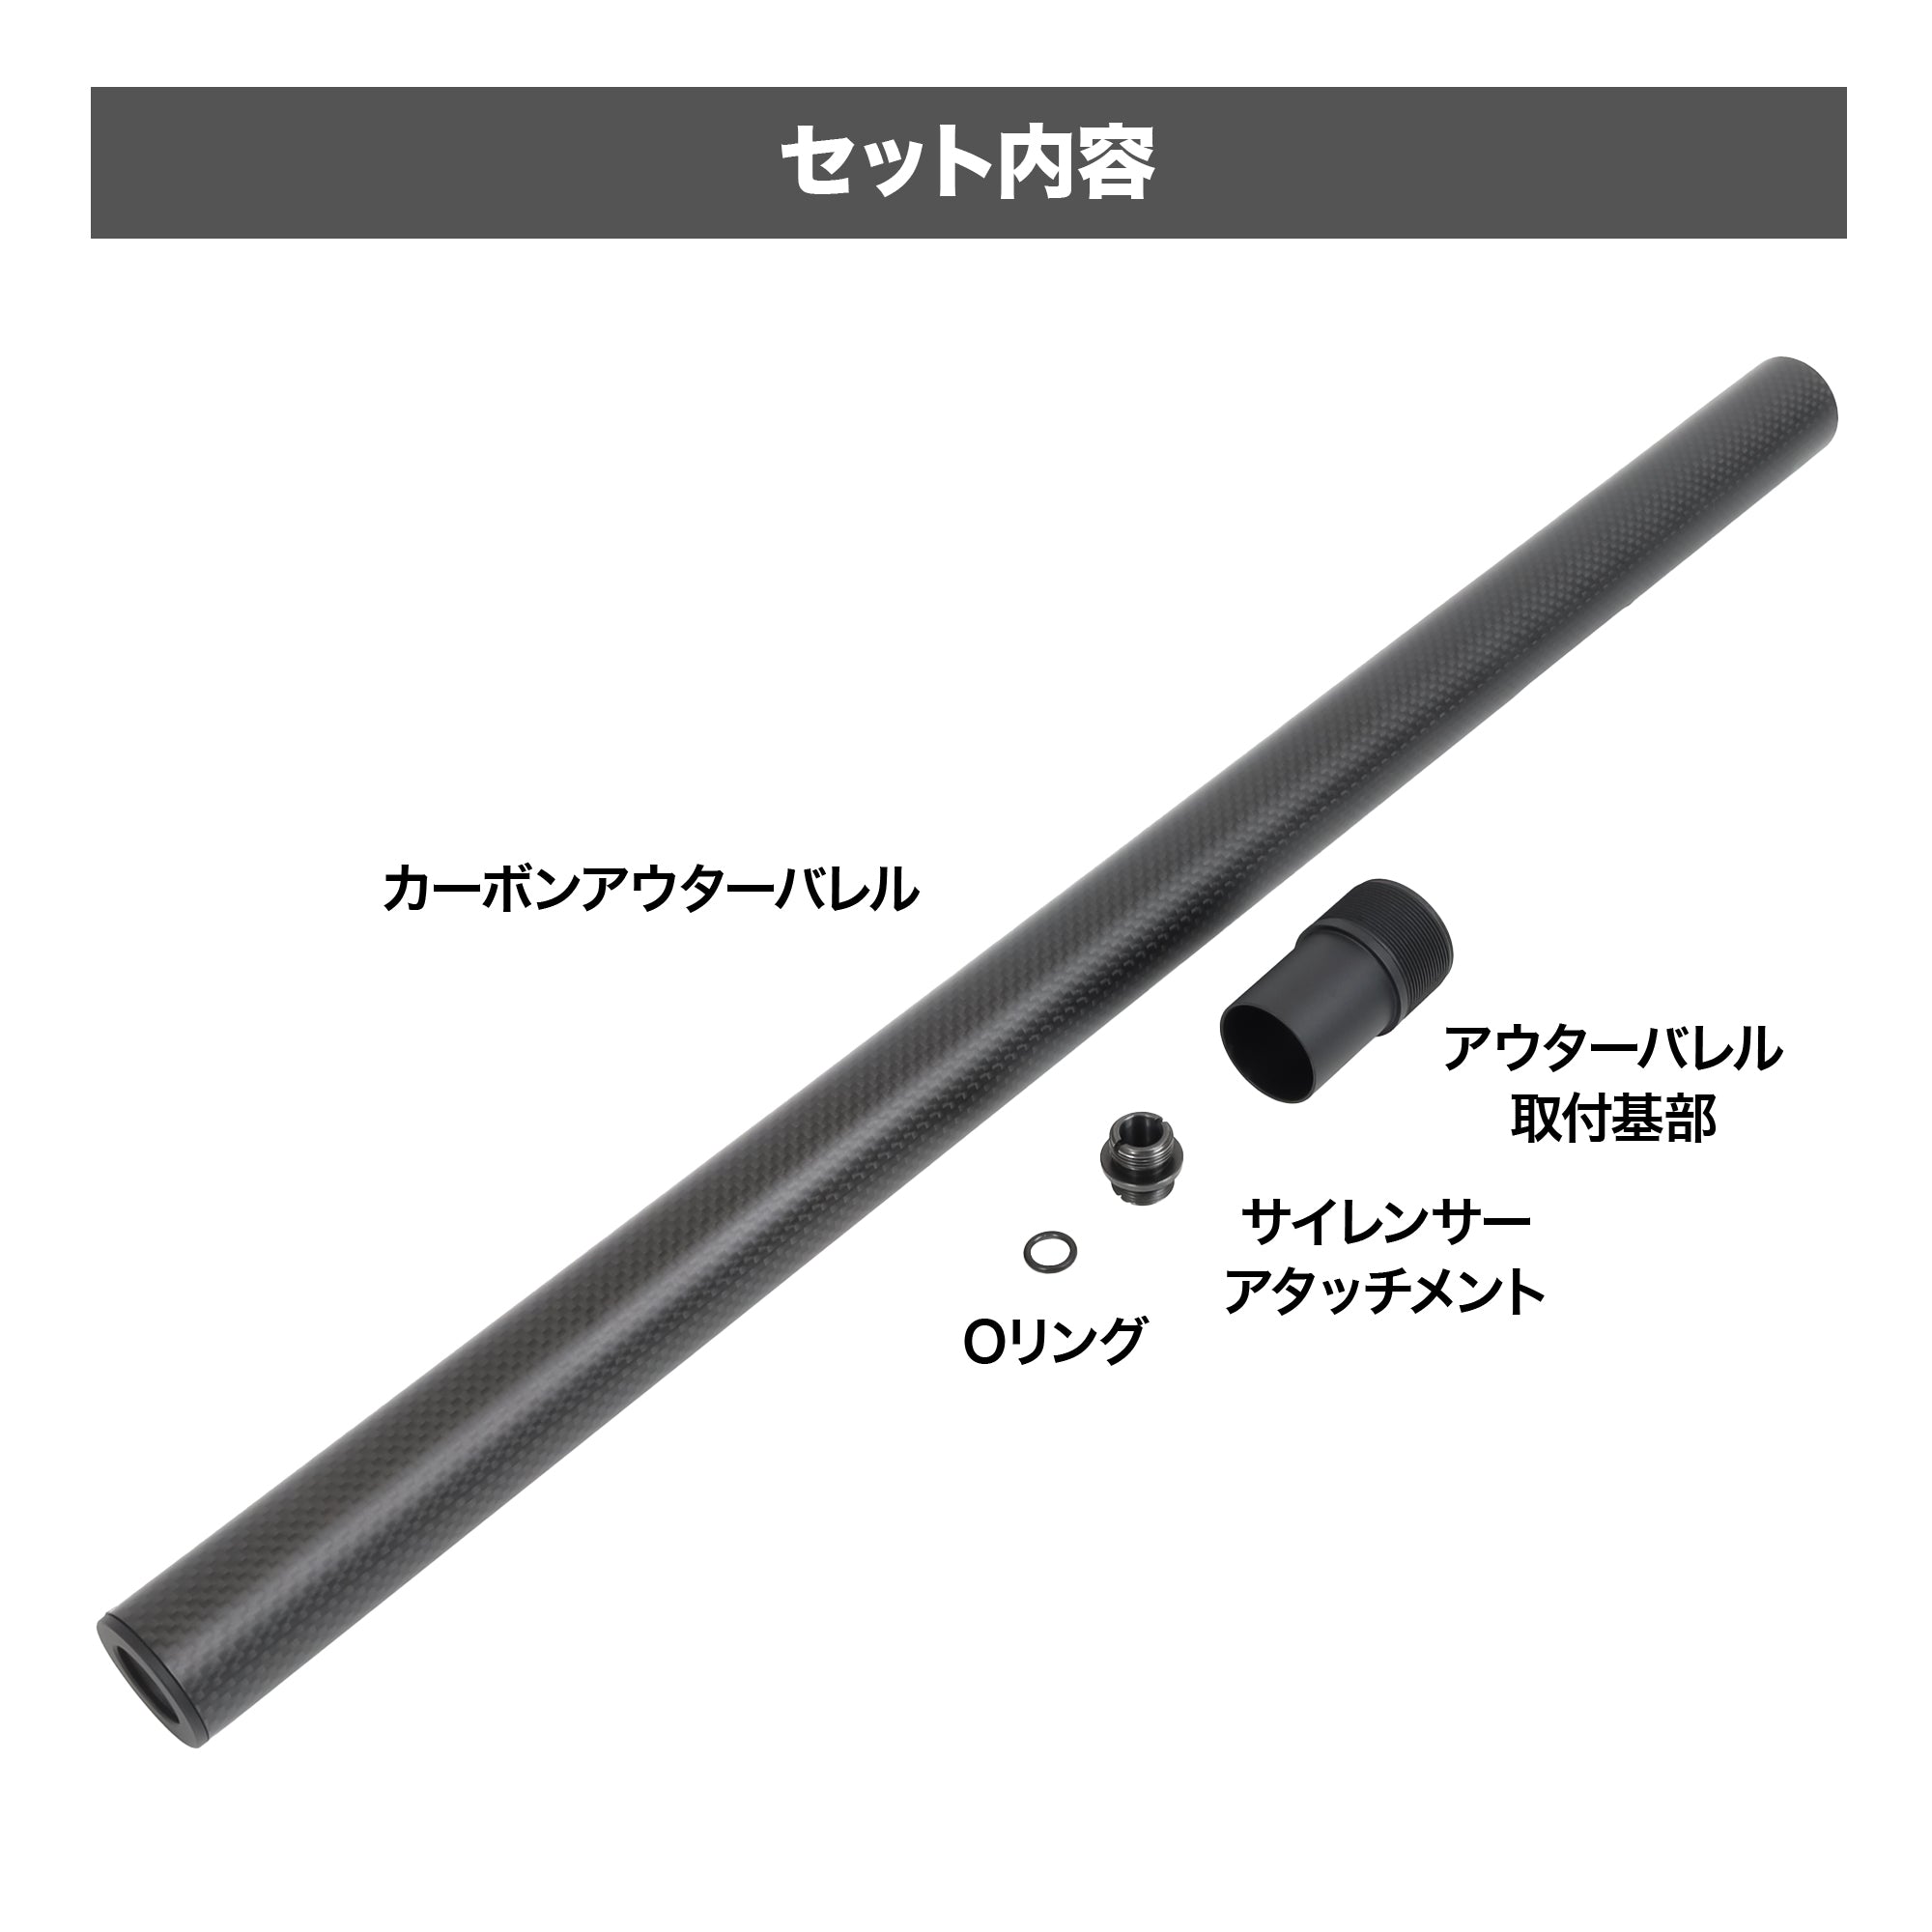 VSR-10 Carbon Outer Barrel [PSS] [Scheduled to be released in December! Now accepting reservations]